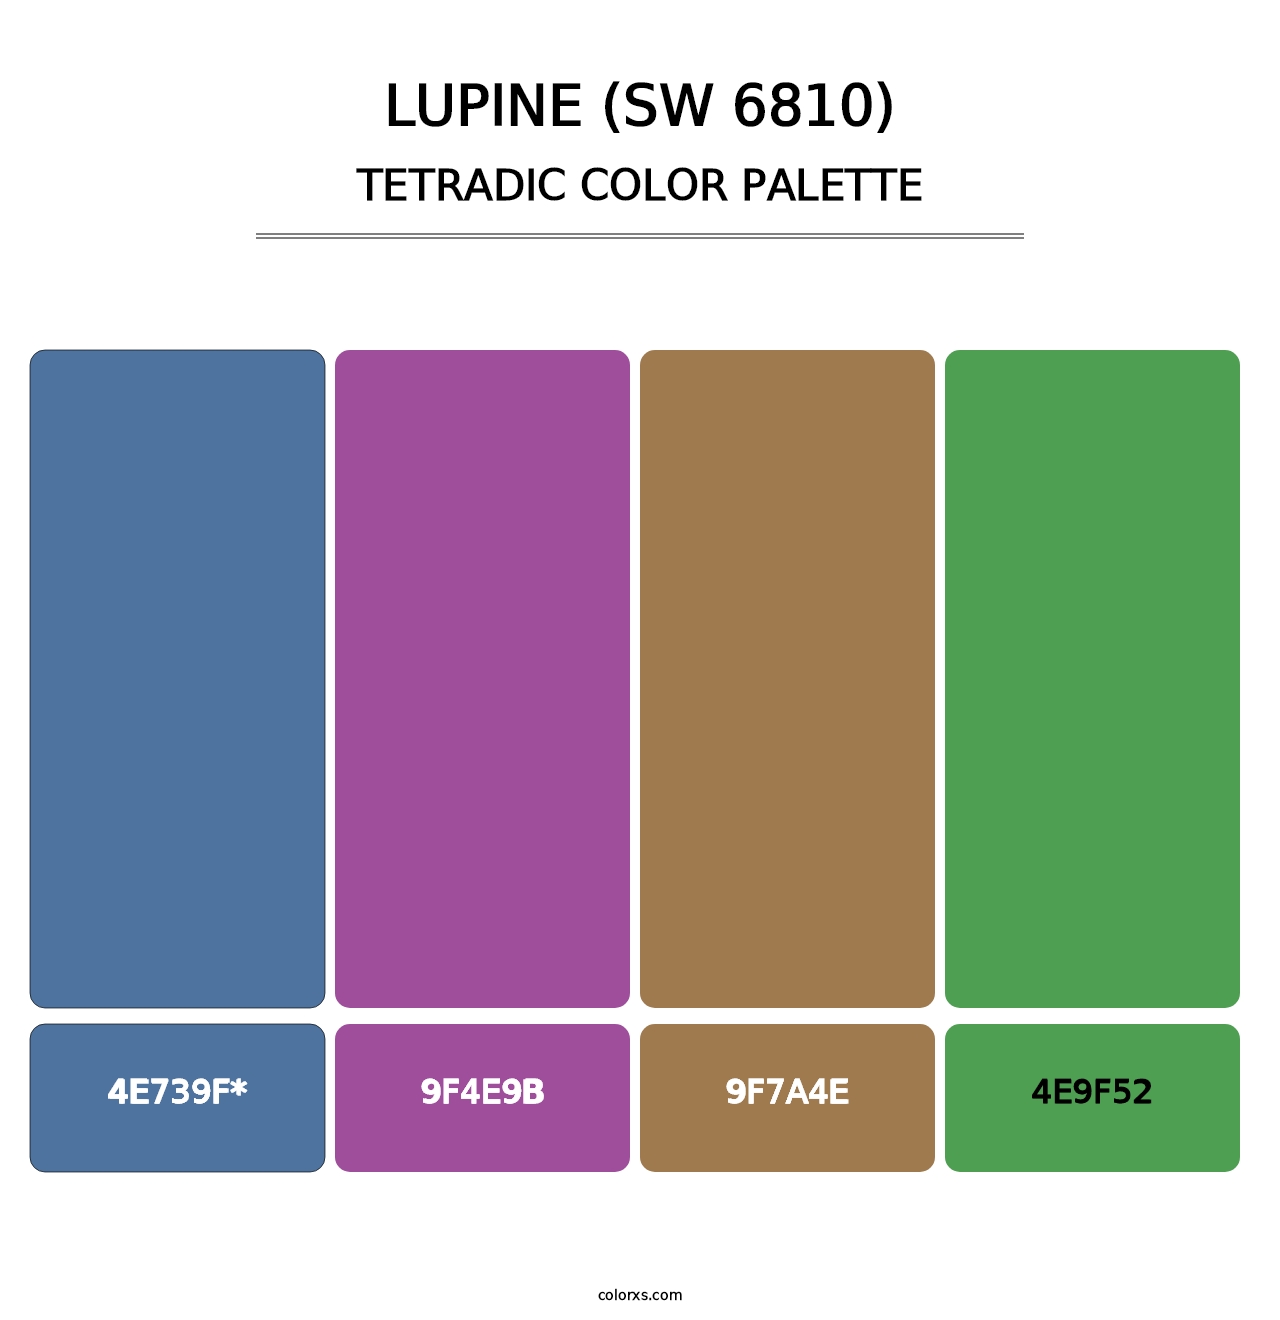 Lupine (SW 6810) - Tetradic Color Palette